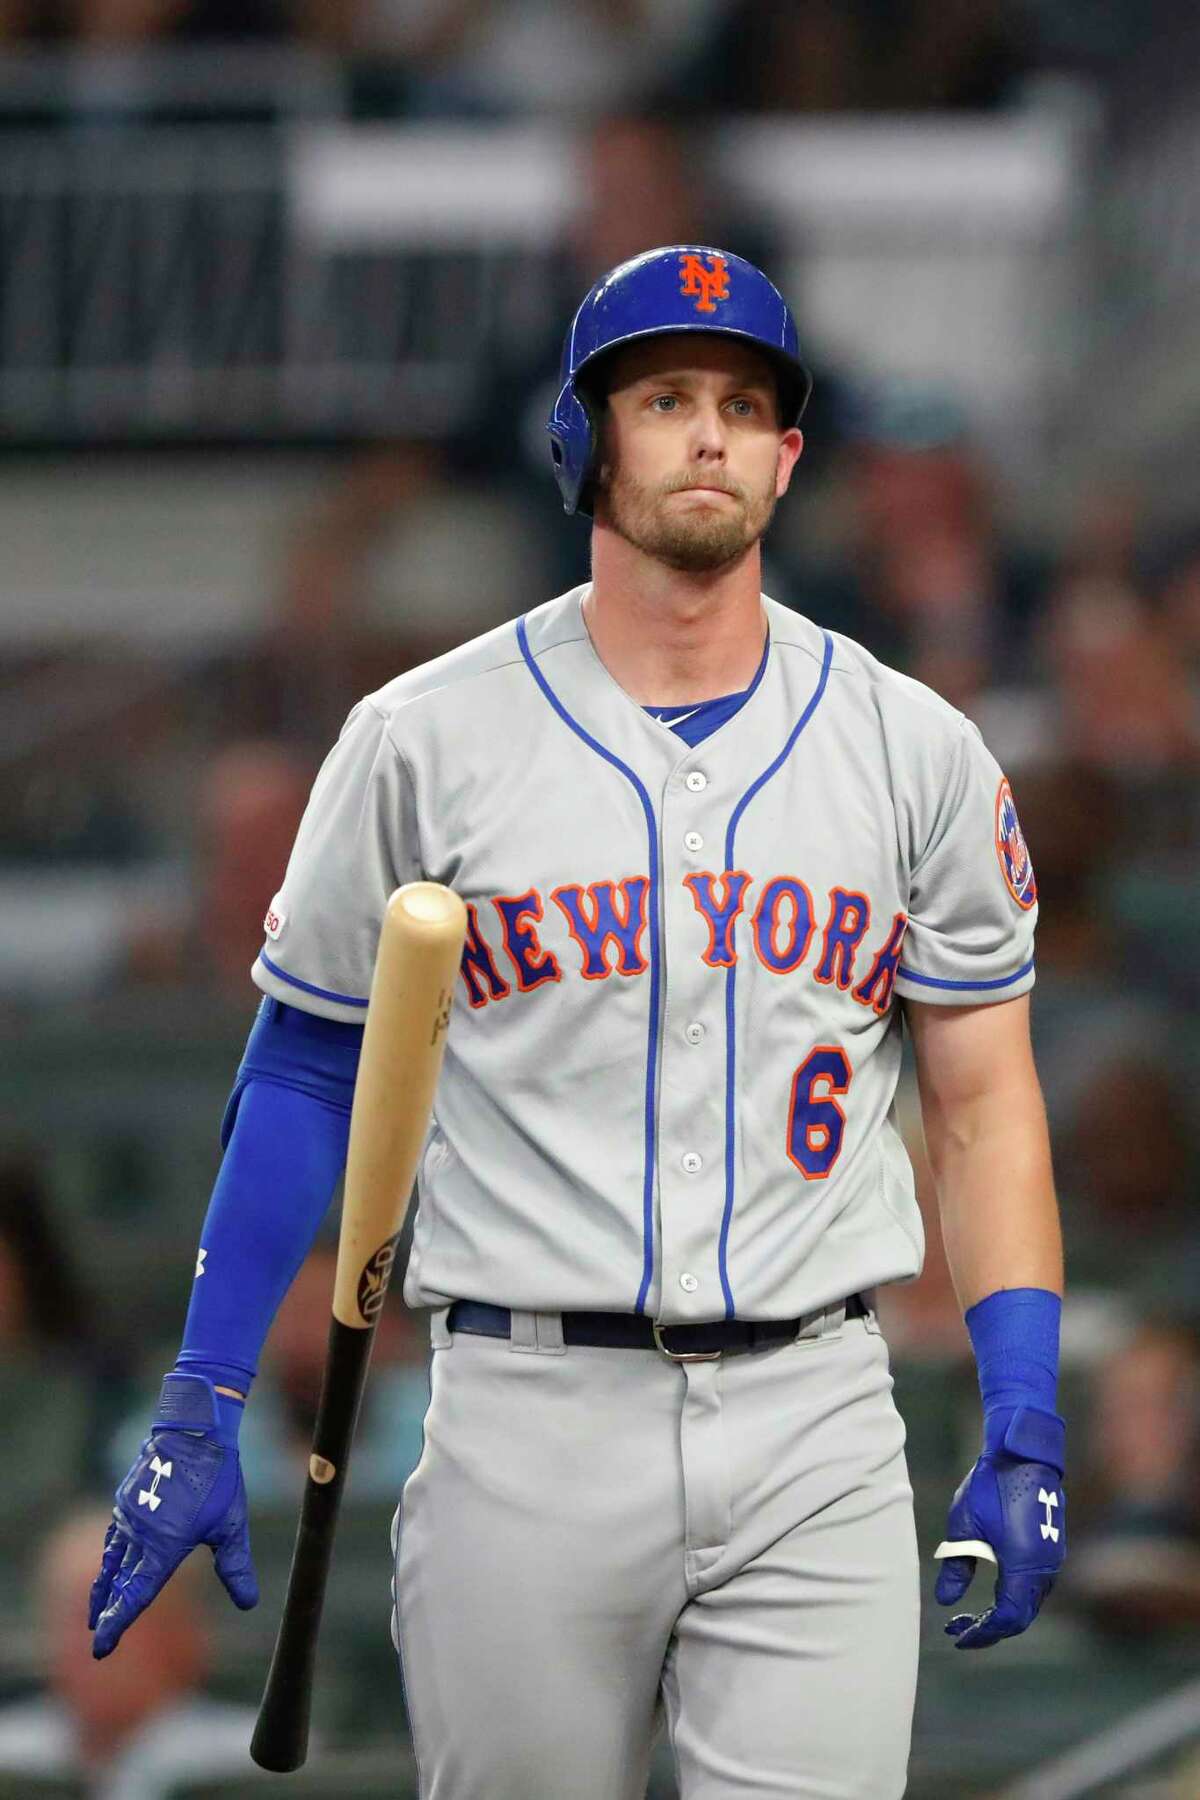 New York Mets' Jeff McNeil reacts after striking out to end the top of the fourth inning of the team's baseball game against the Atlanta Braves on Tuesday, Aug. 13, 2019, in Atlanta. The Braves won 5-3. (AP Photo/John Bazemore)